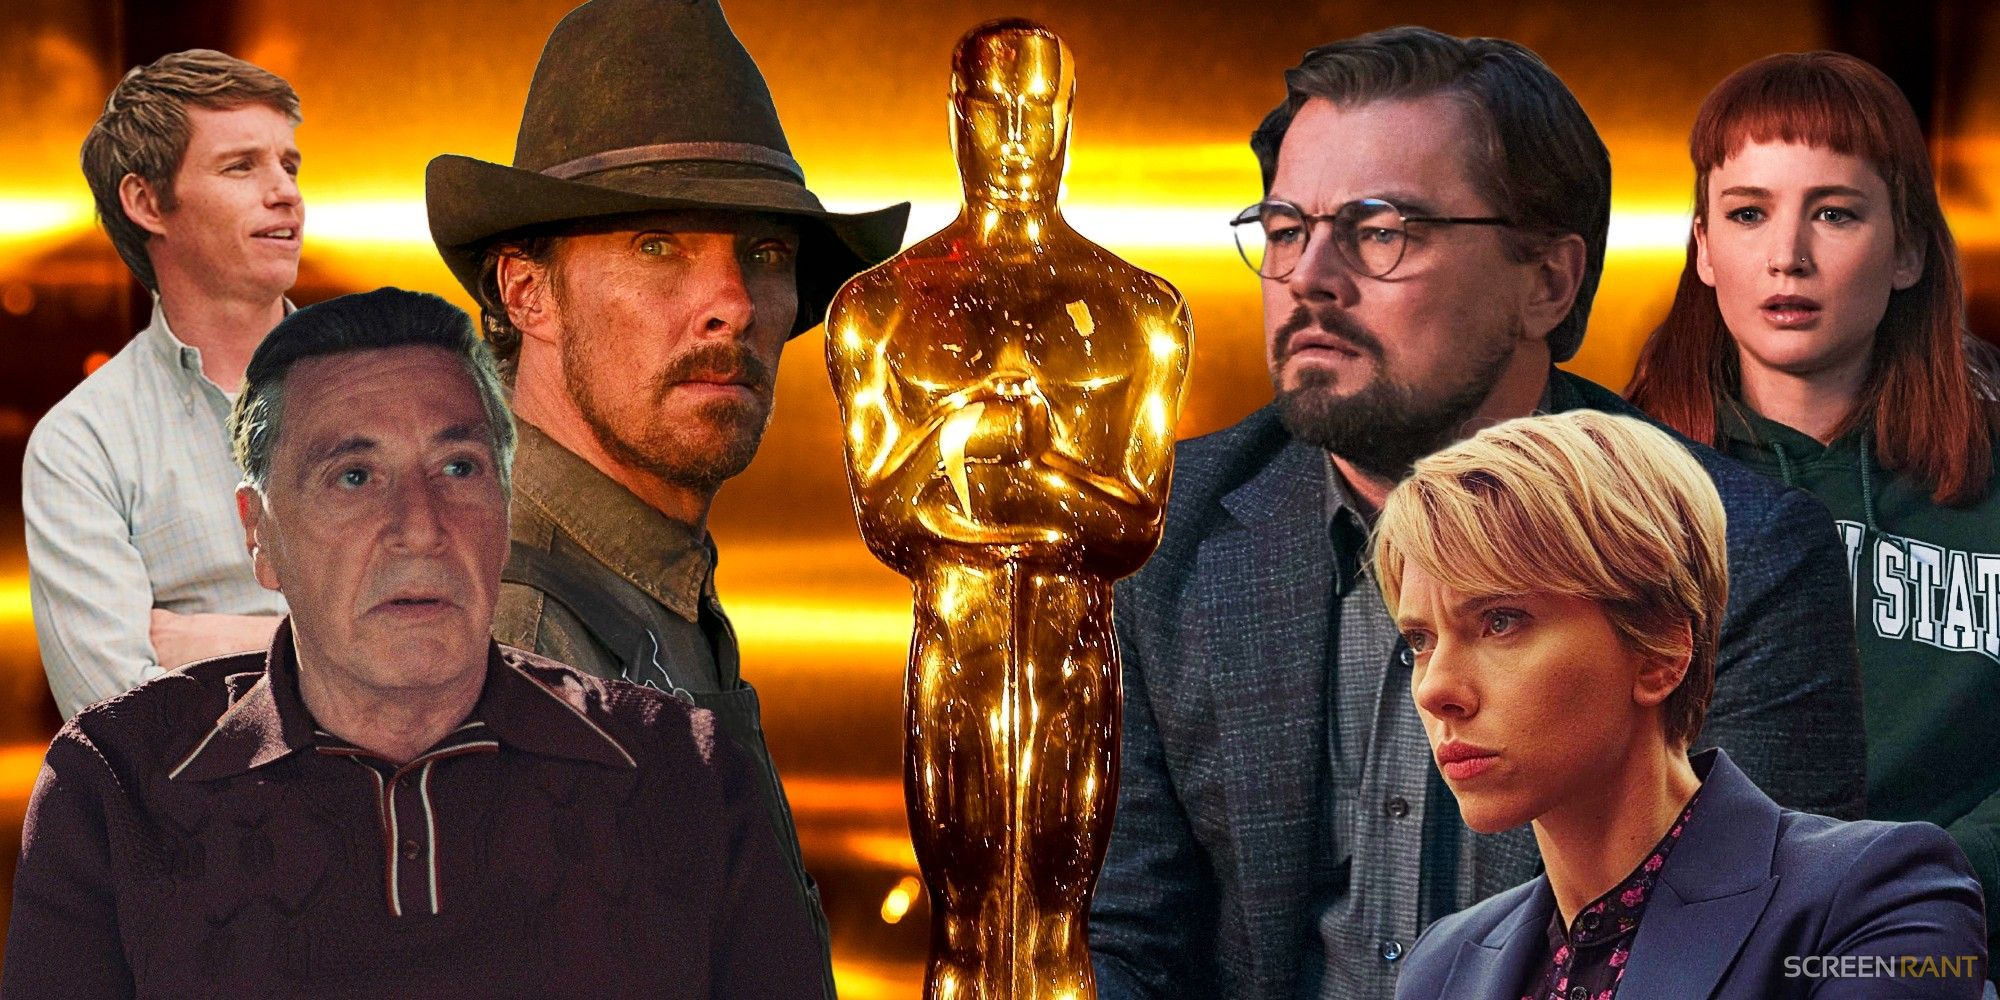 Trial of Chicago 7, The Irishman, The Power of the Dog, Don't Look Up, and Marriage Story with Oscars statue